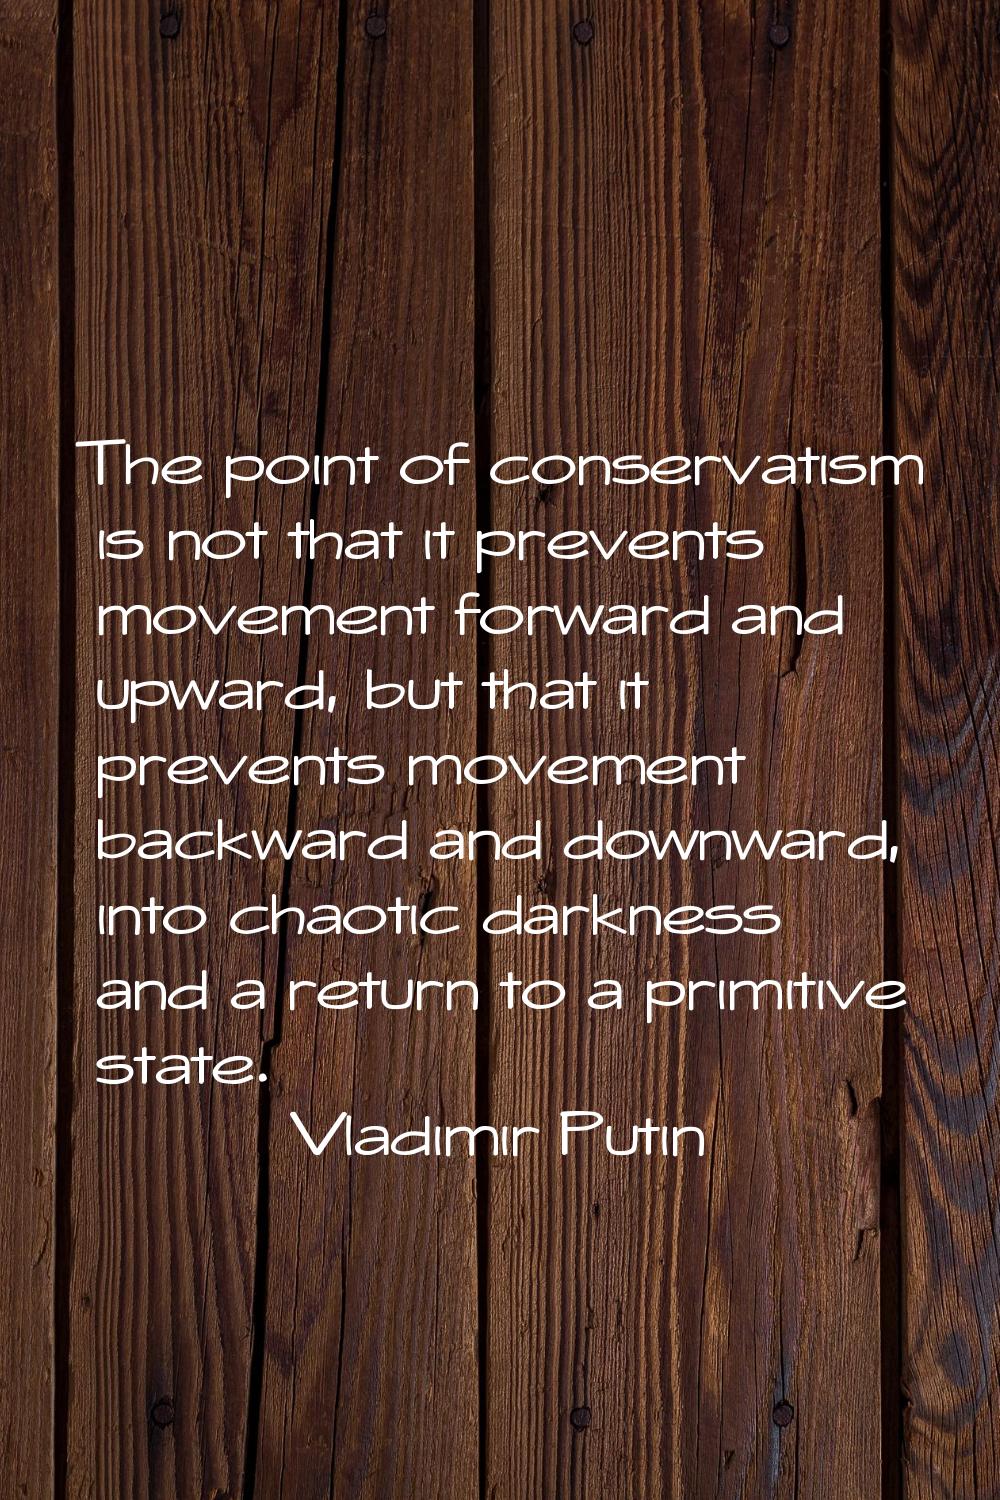 The point of conservatism is not that it prevents movement forward and upward, but that it prevents